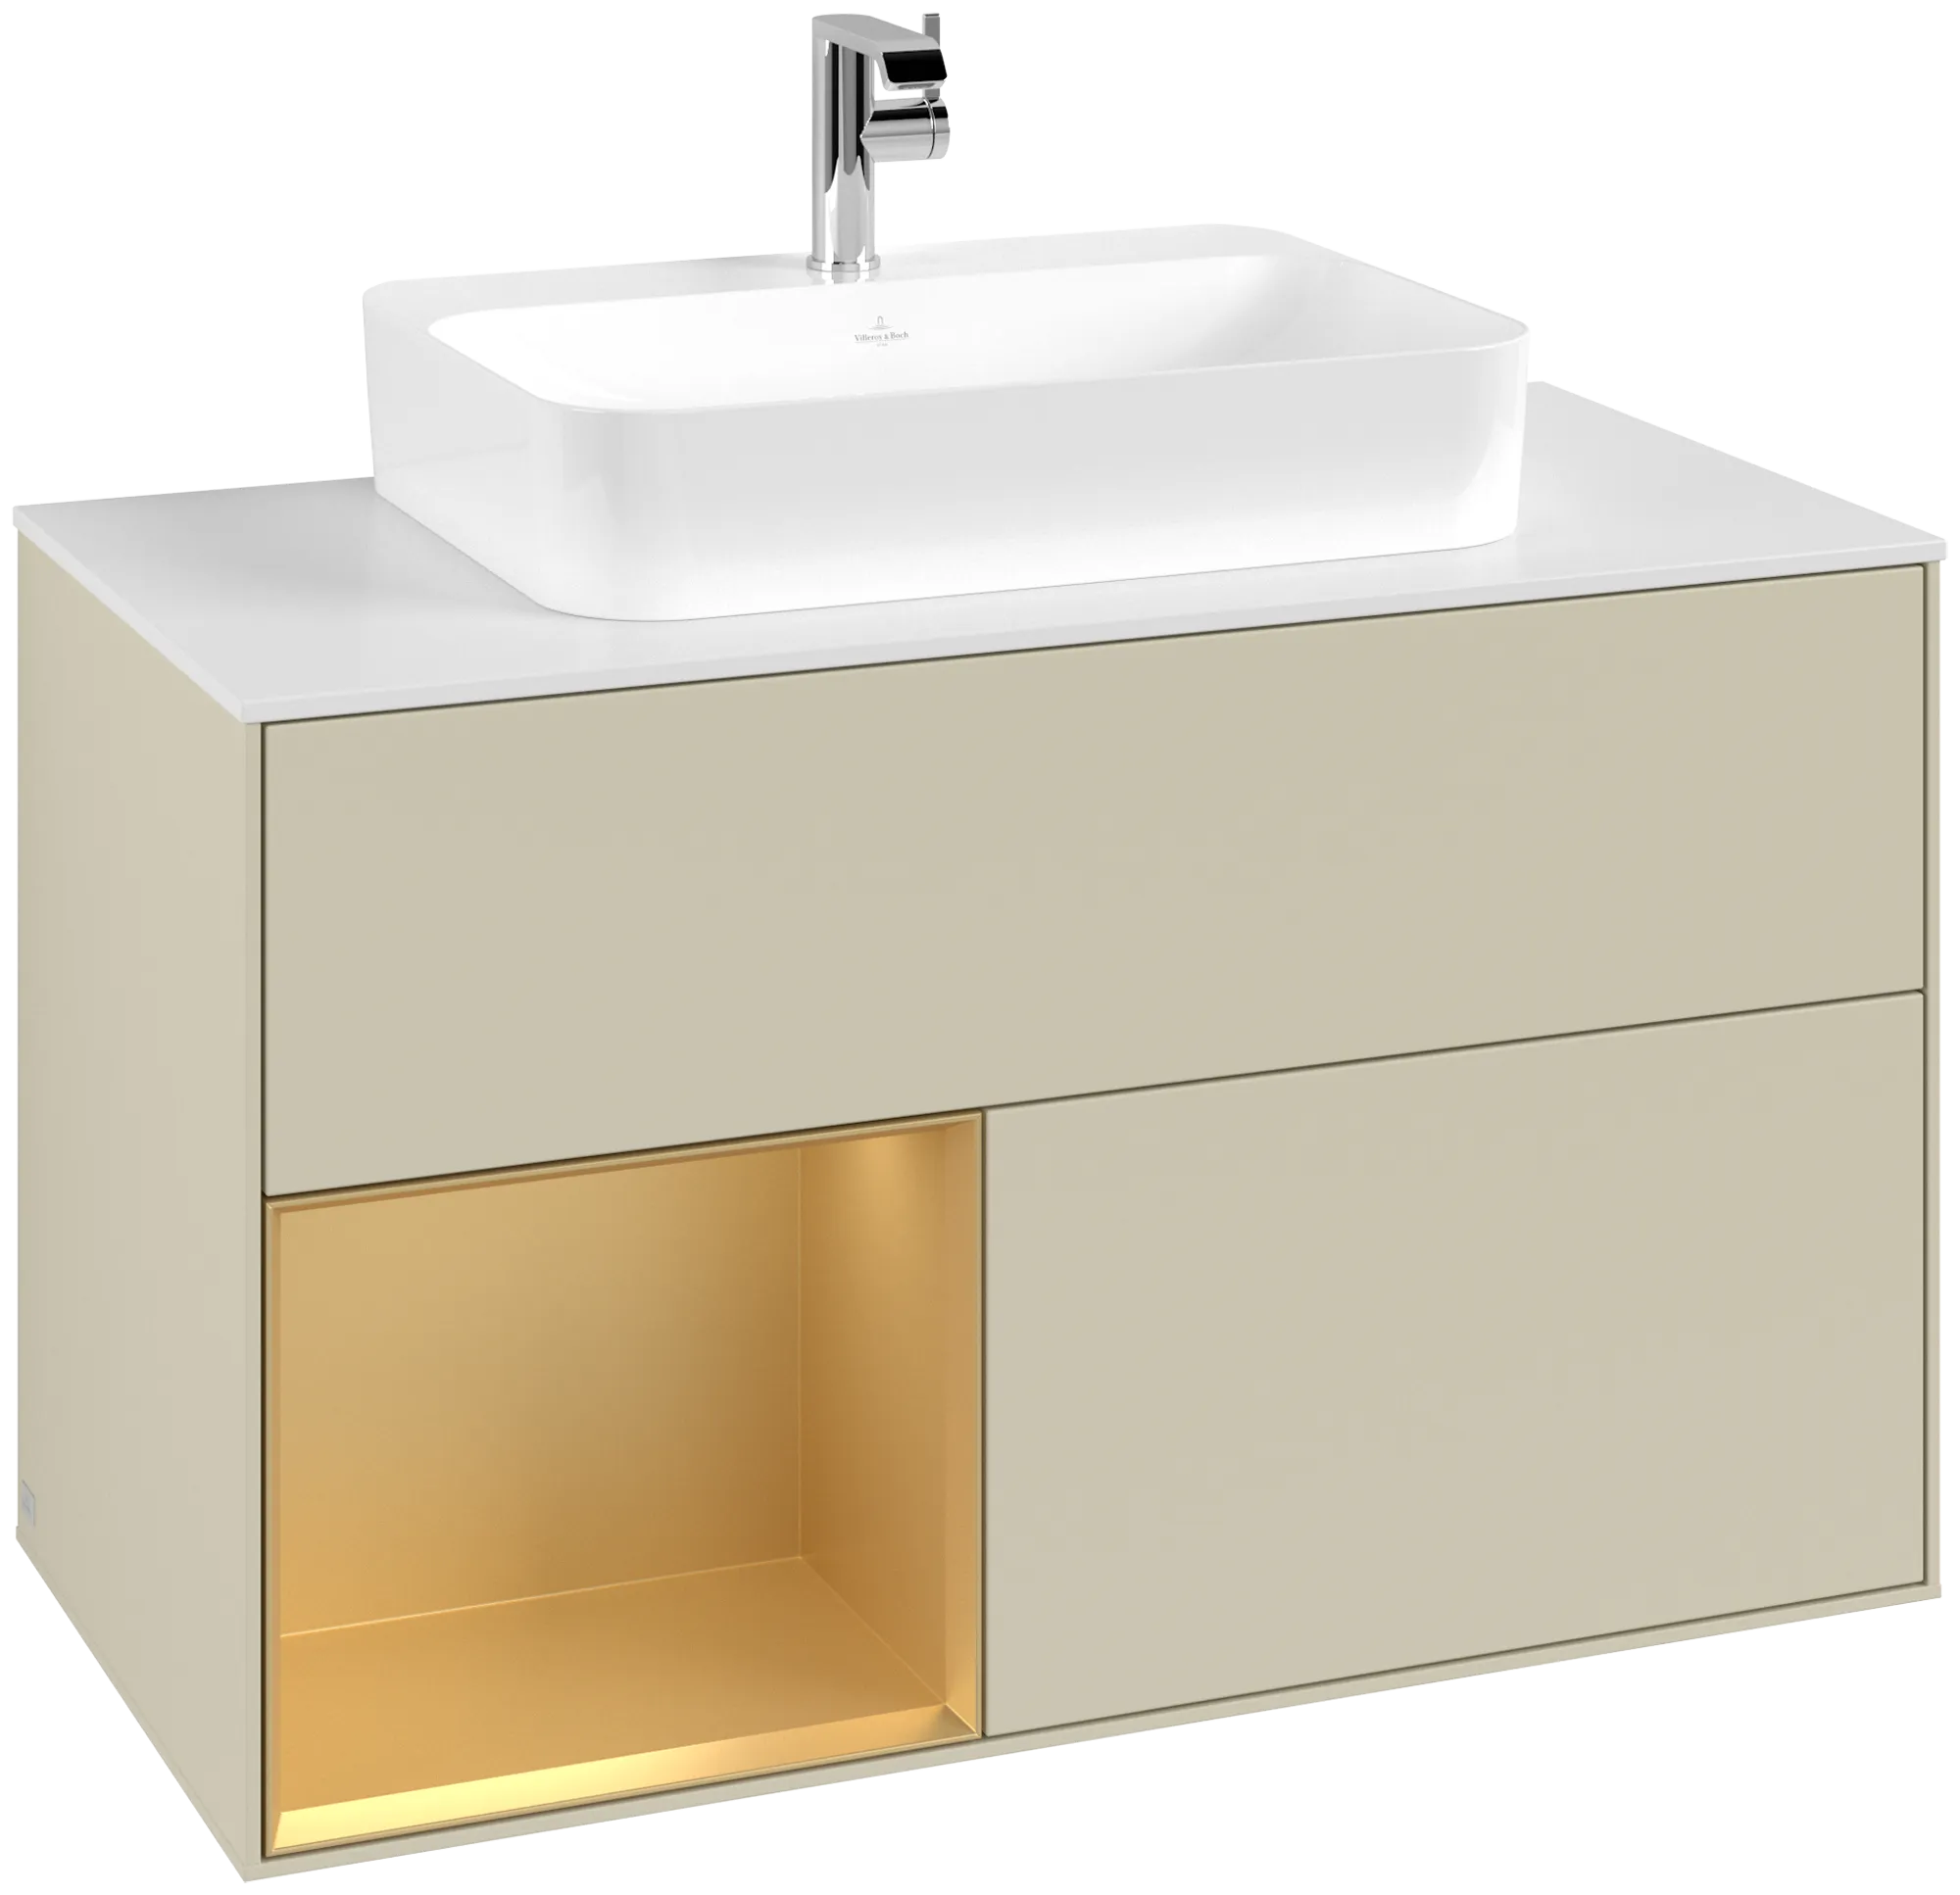 Picture of VILLEROY BOCH Finion Vanity unit, with lighting, 2 pull-out compartments, 1000 x 603 x 501 mm, Silk Grey Matt Lacquer / Gold Matt Lacquer / Glass White Matt #G361HFHJ